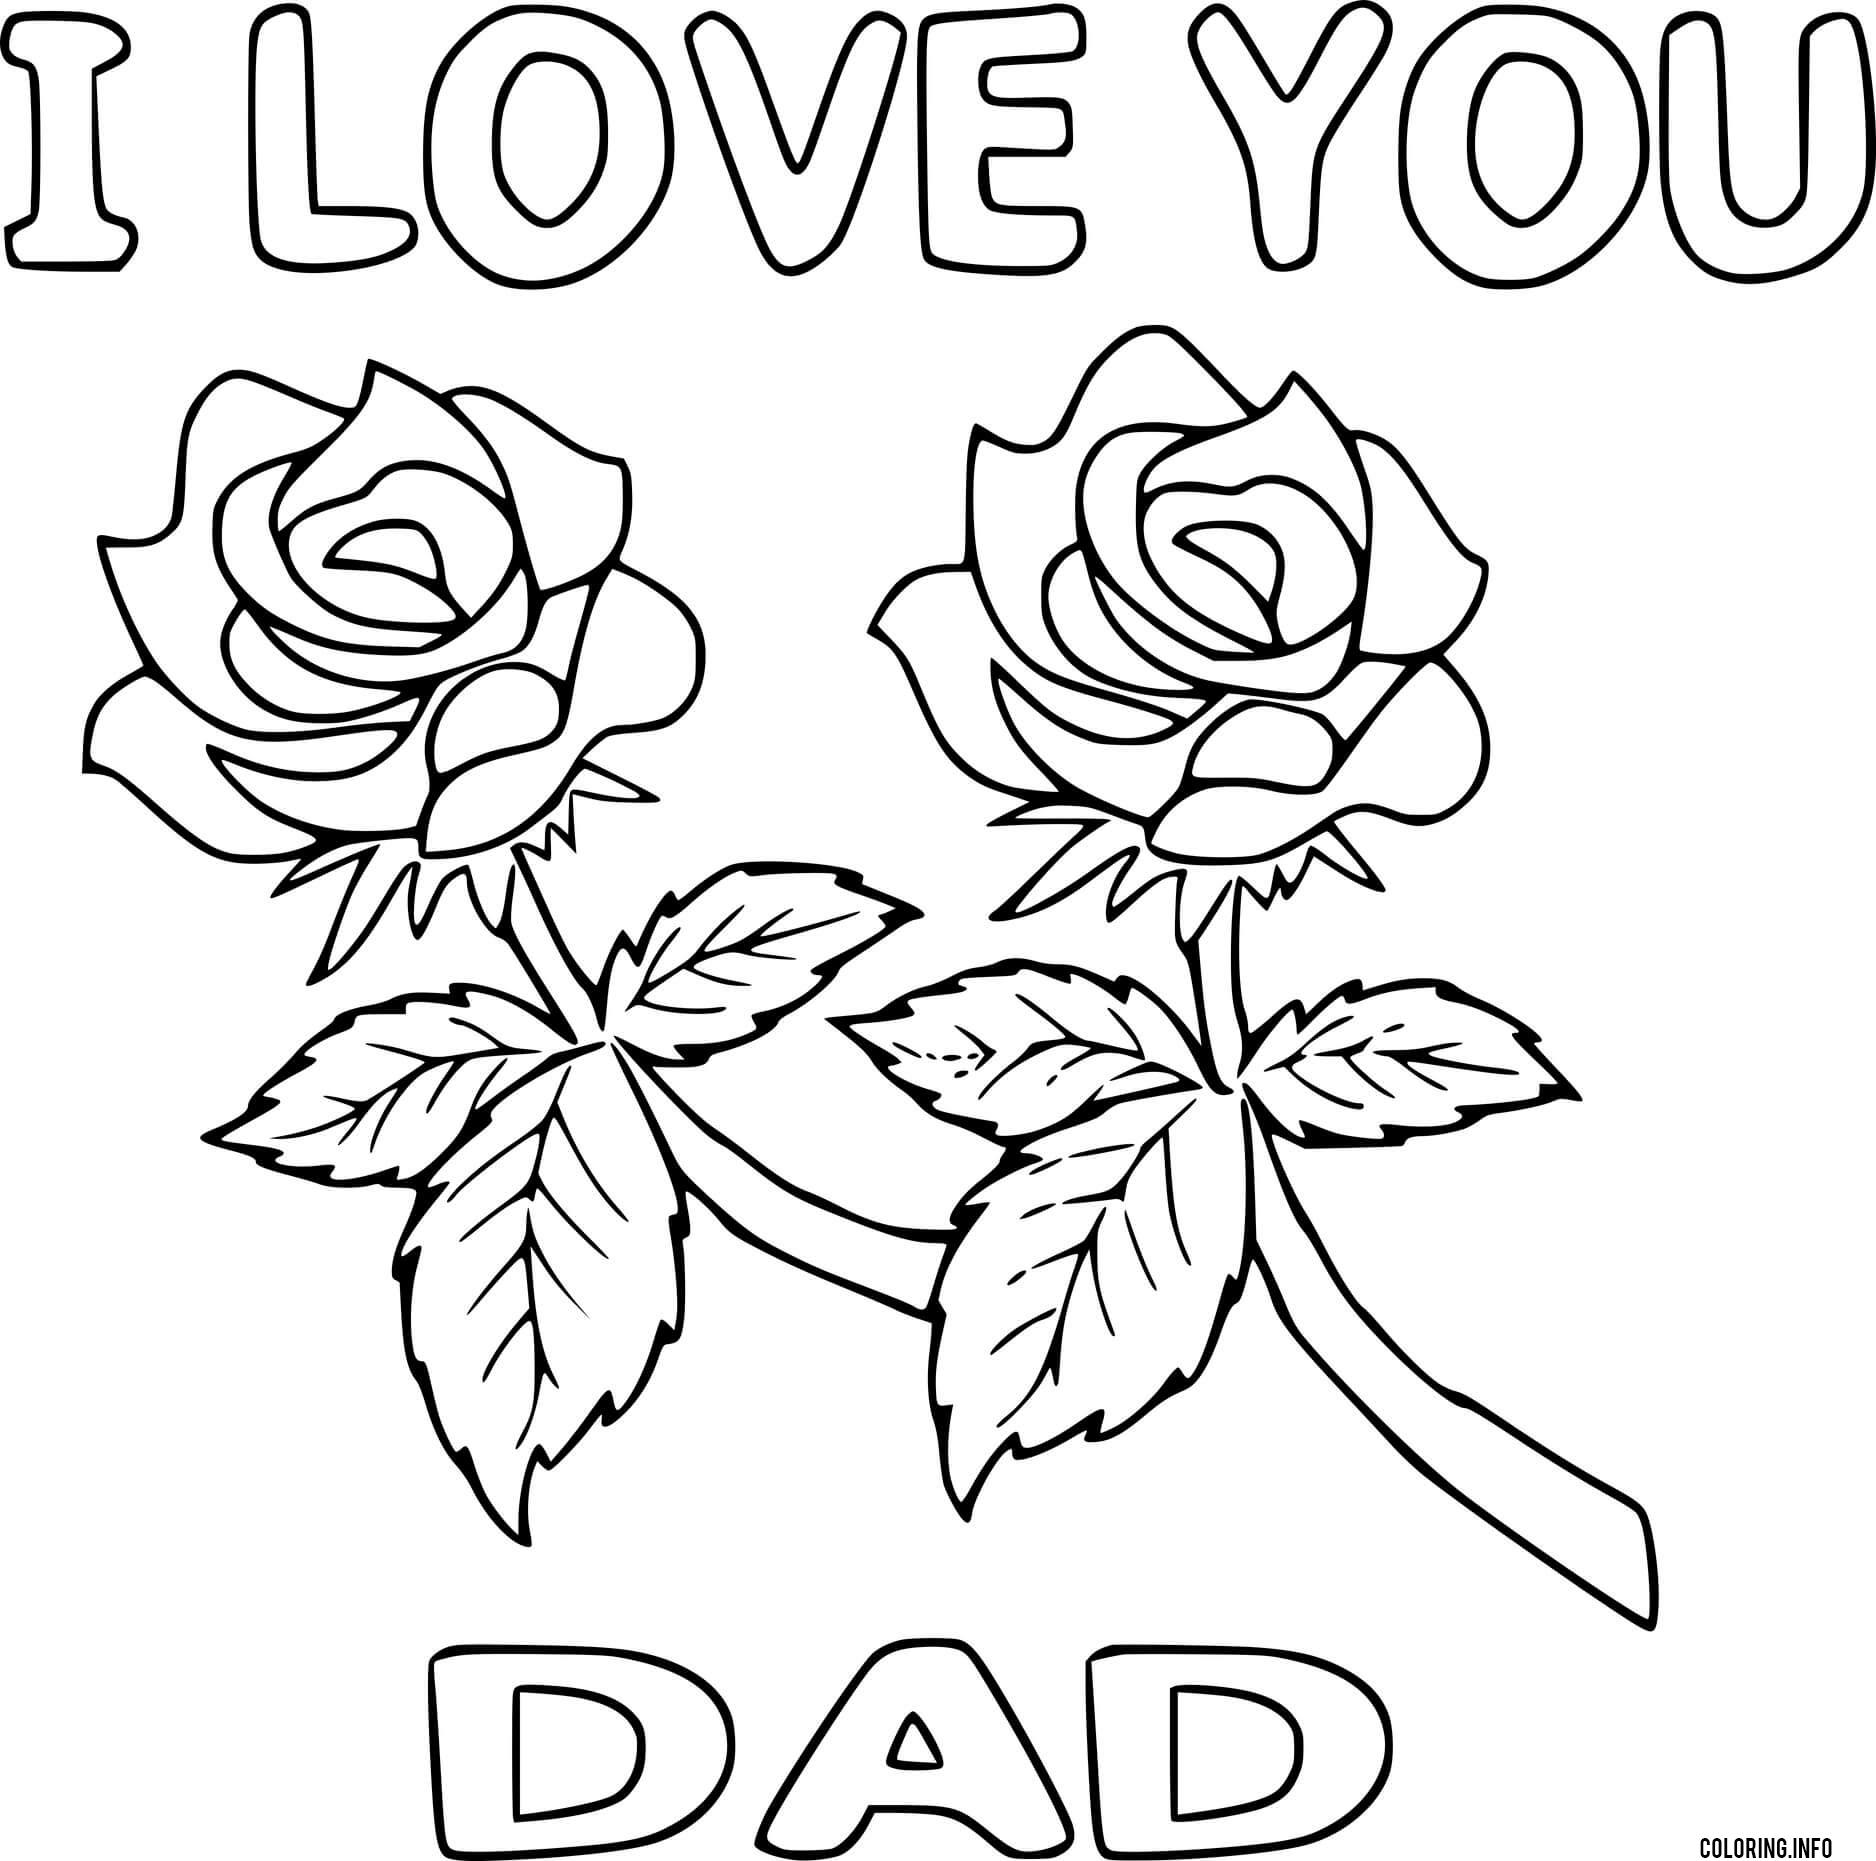 I Love You Dad With Two Flowers coloring